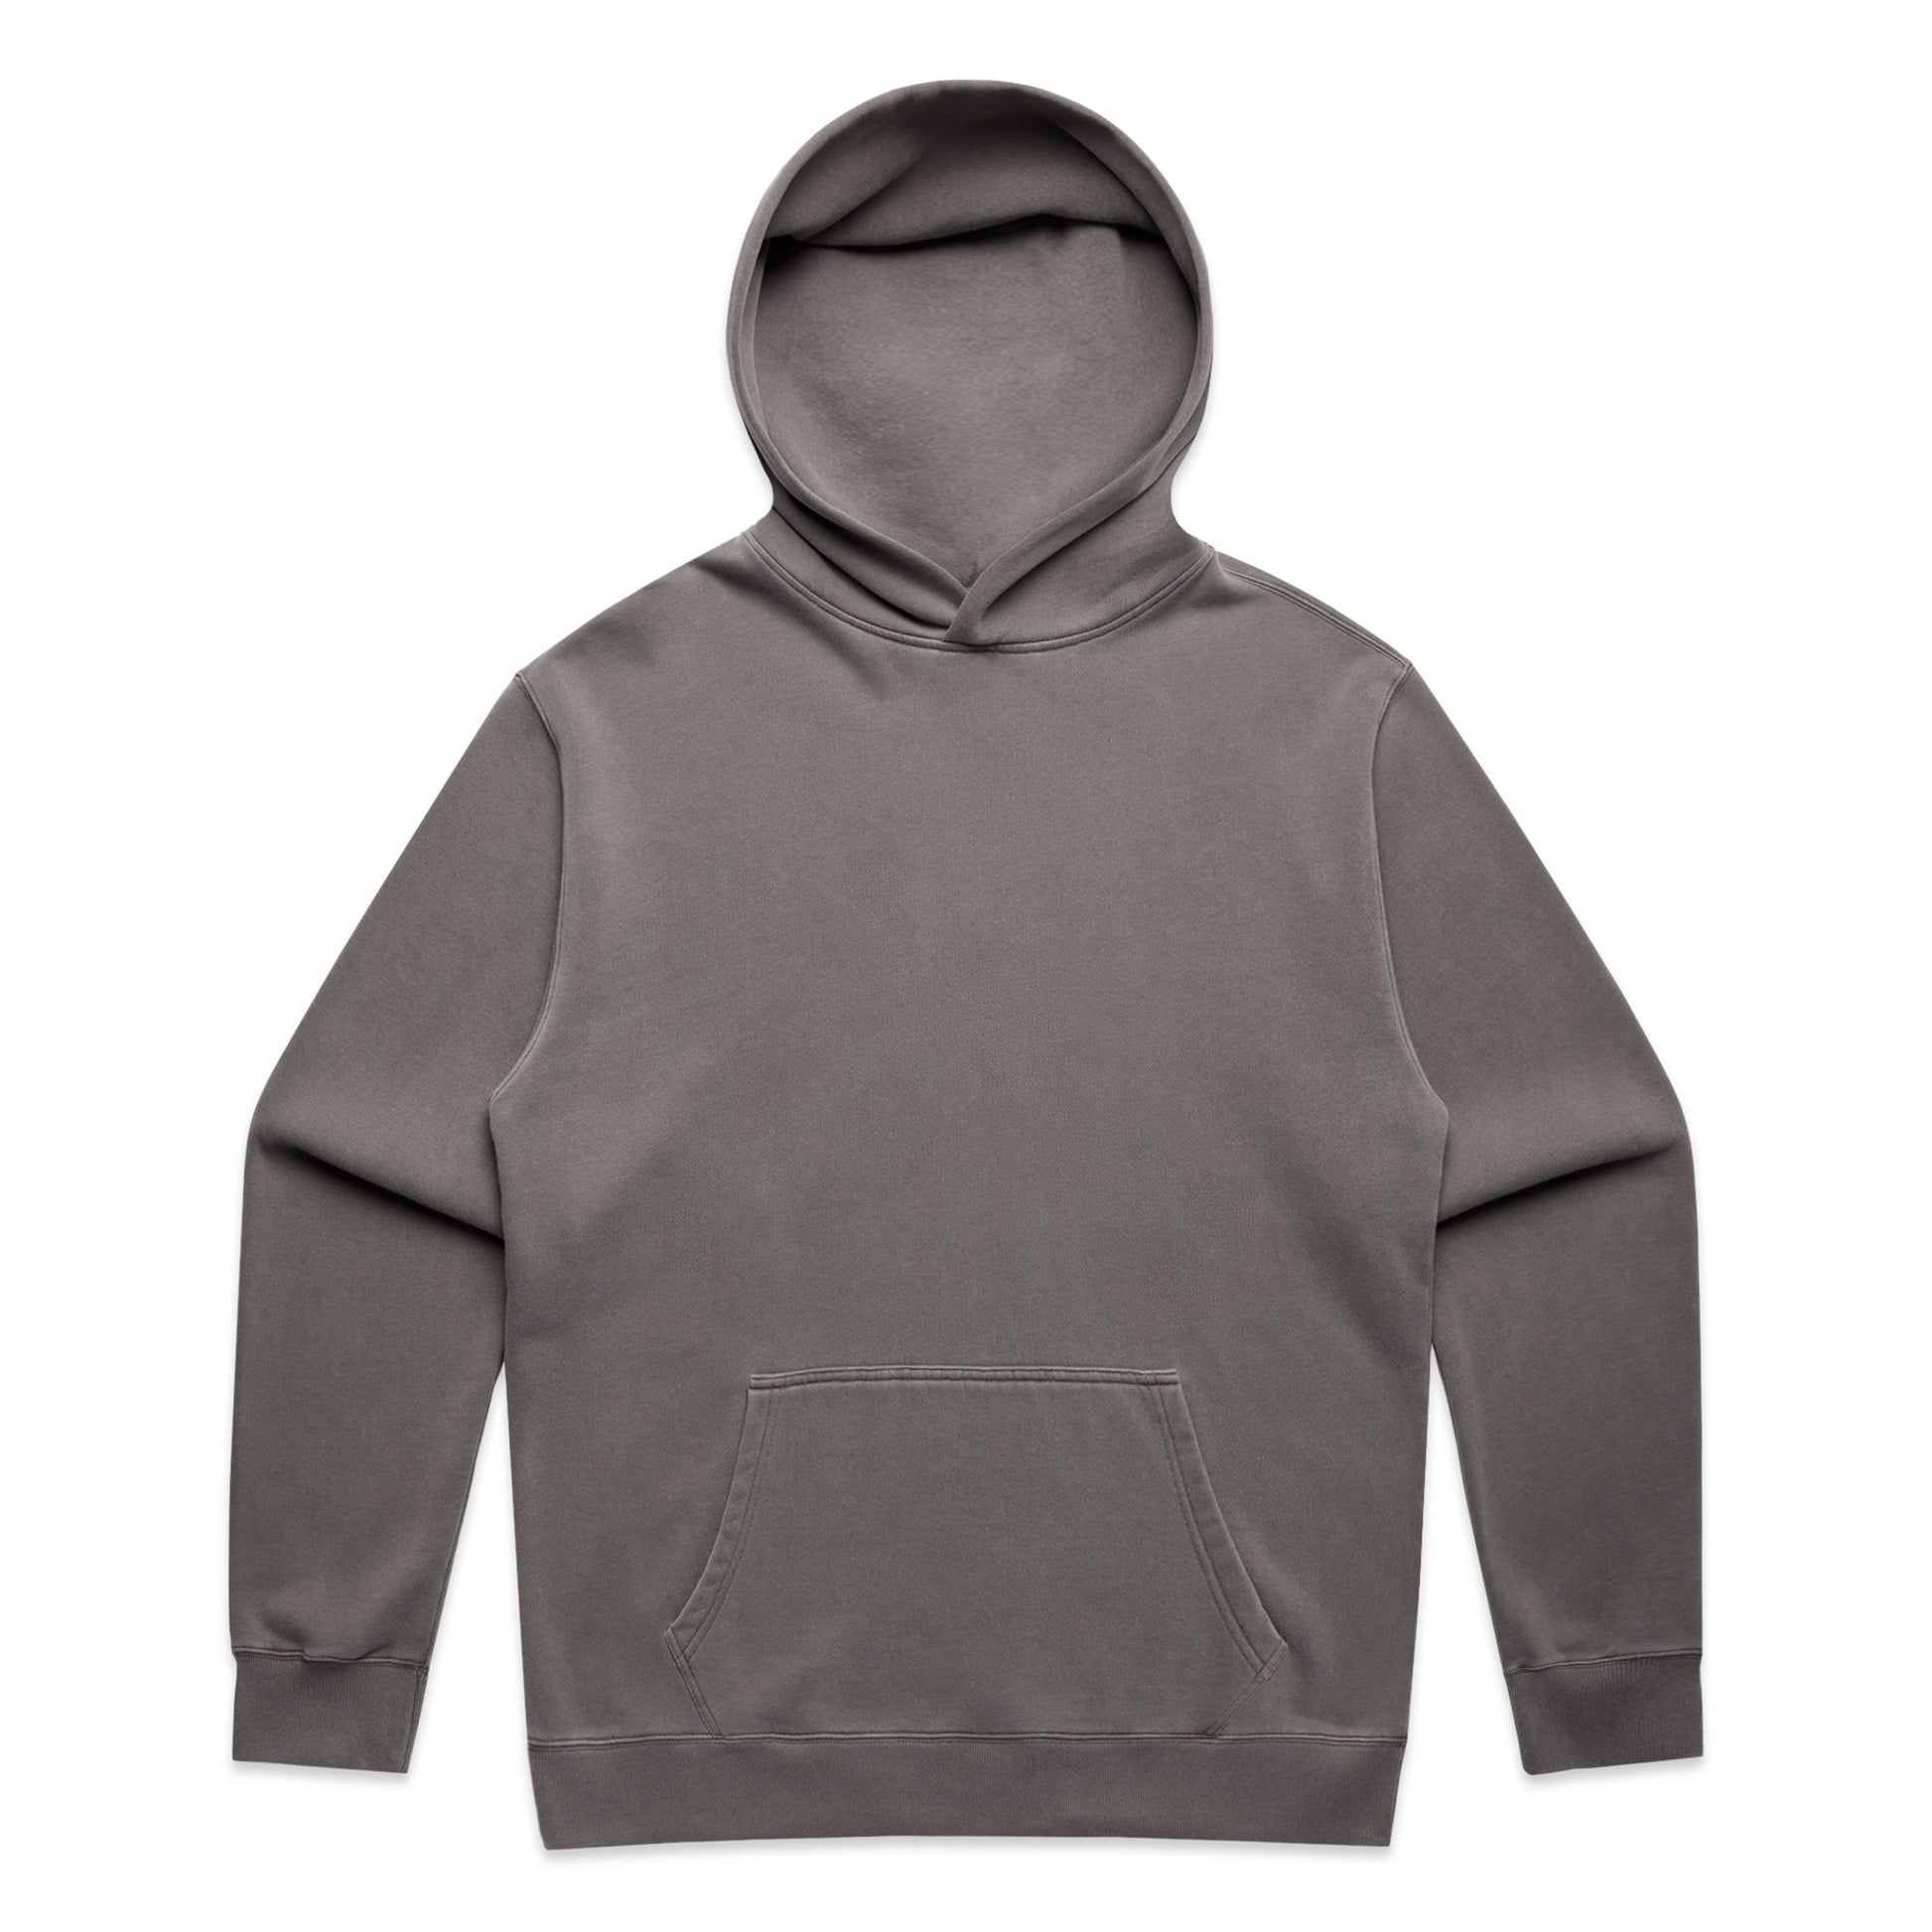 Faded Relax Hood - 5166